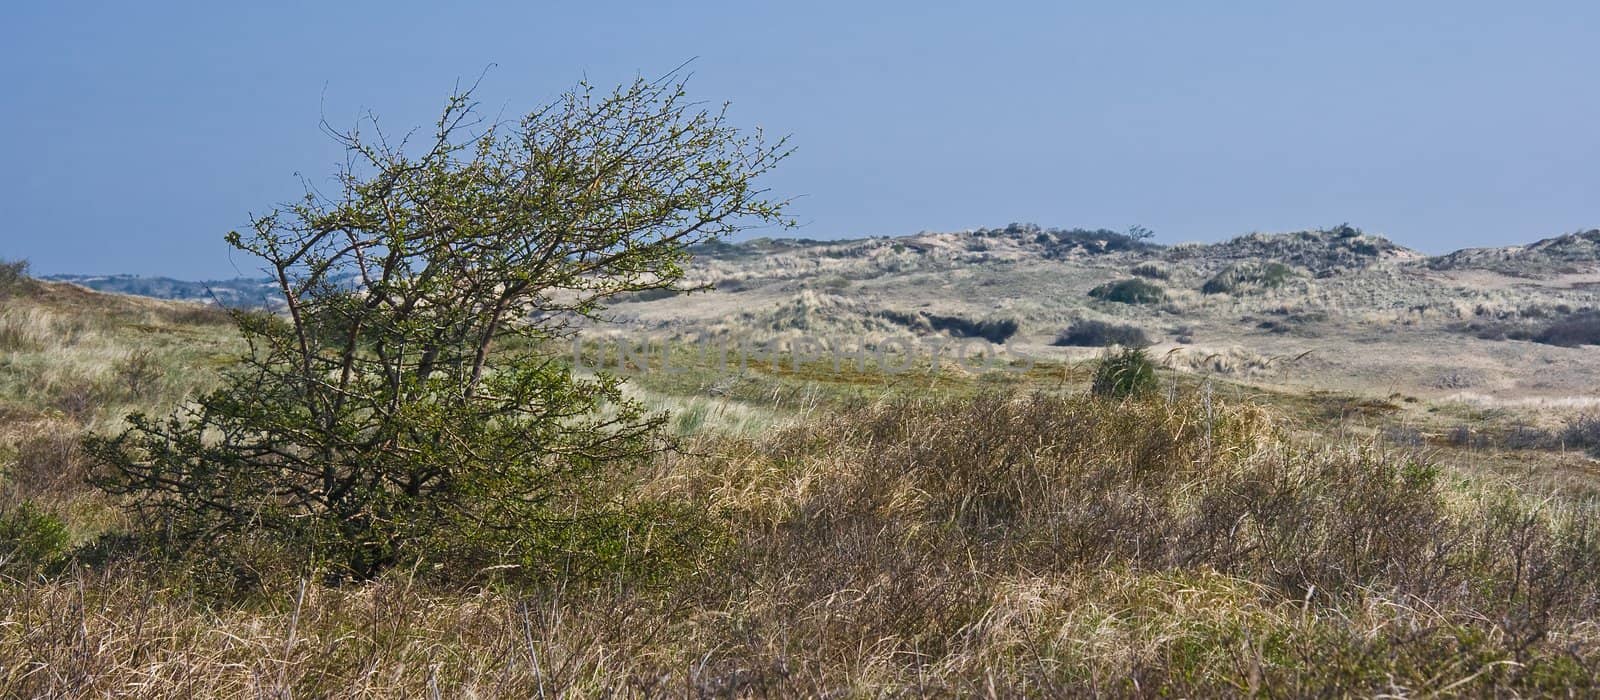 Landscape with dunes and bushes in spring